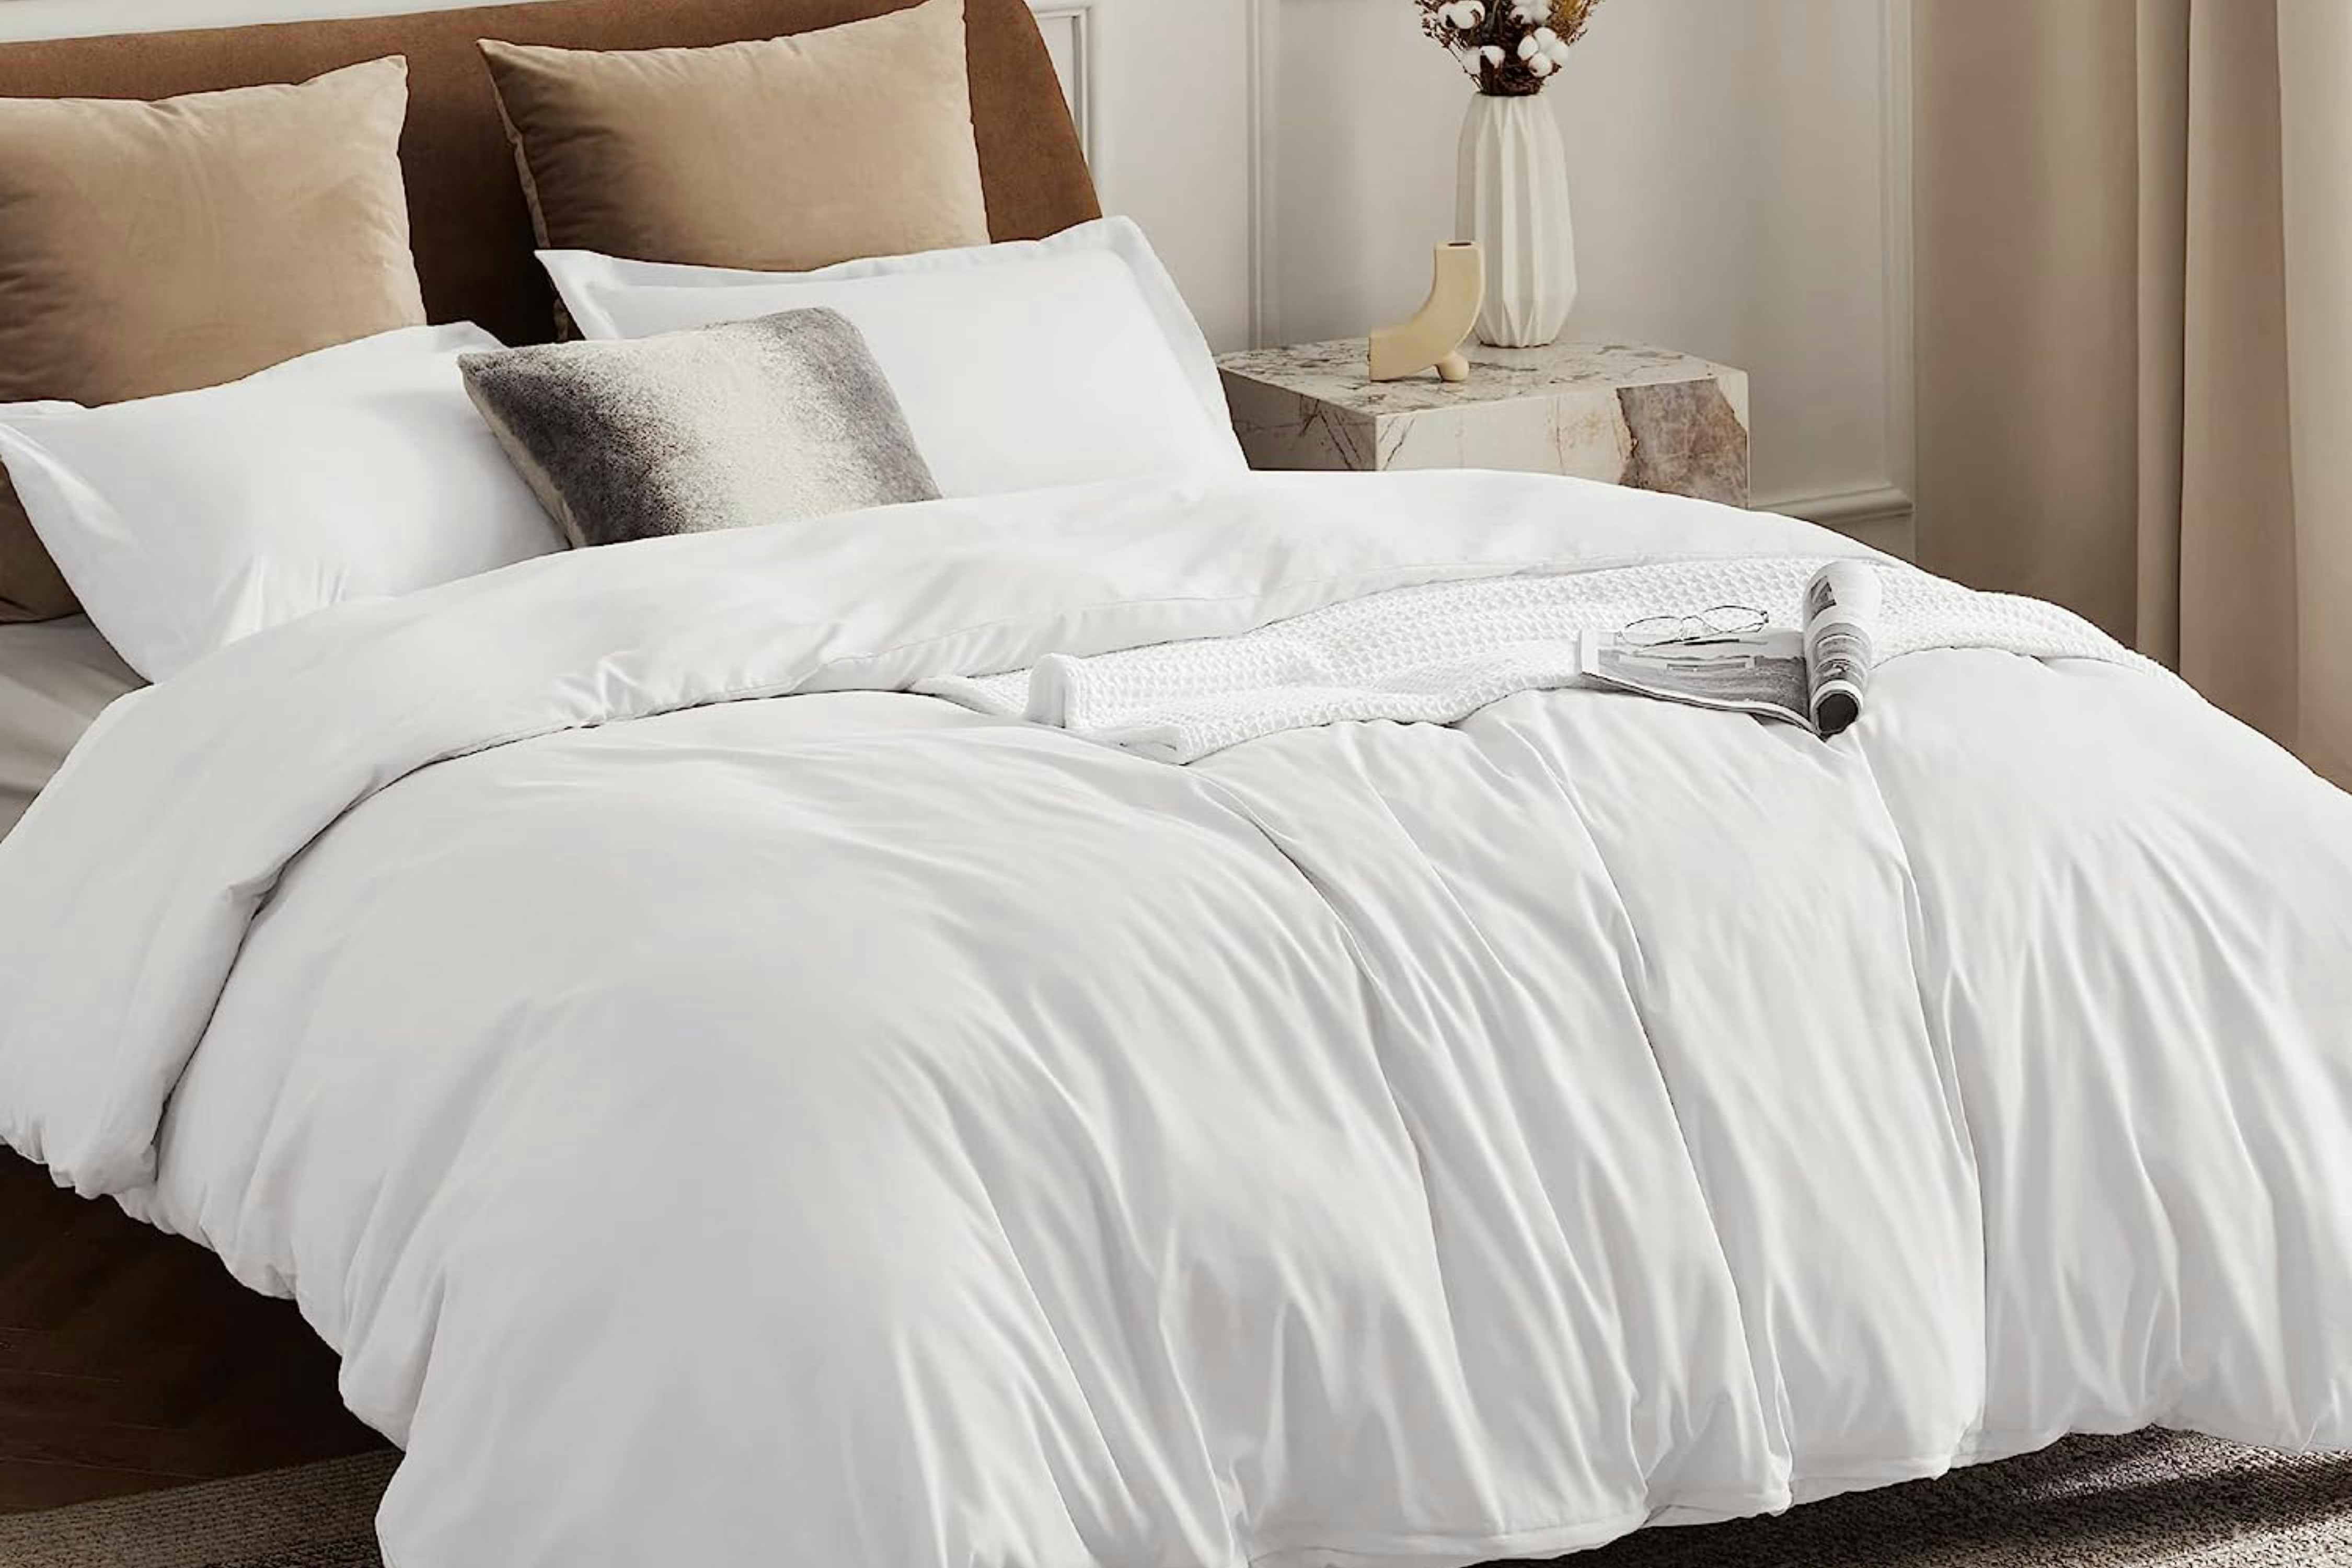 Queen-Size Duvet Cover With 2 Shams, $9.98 on Amazon for a Limited Time